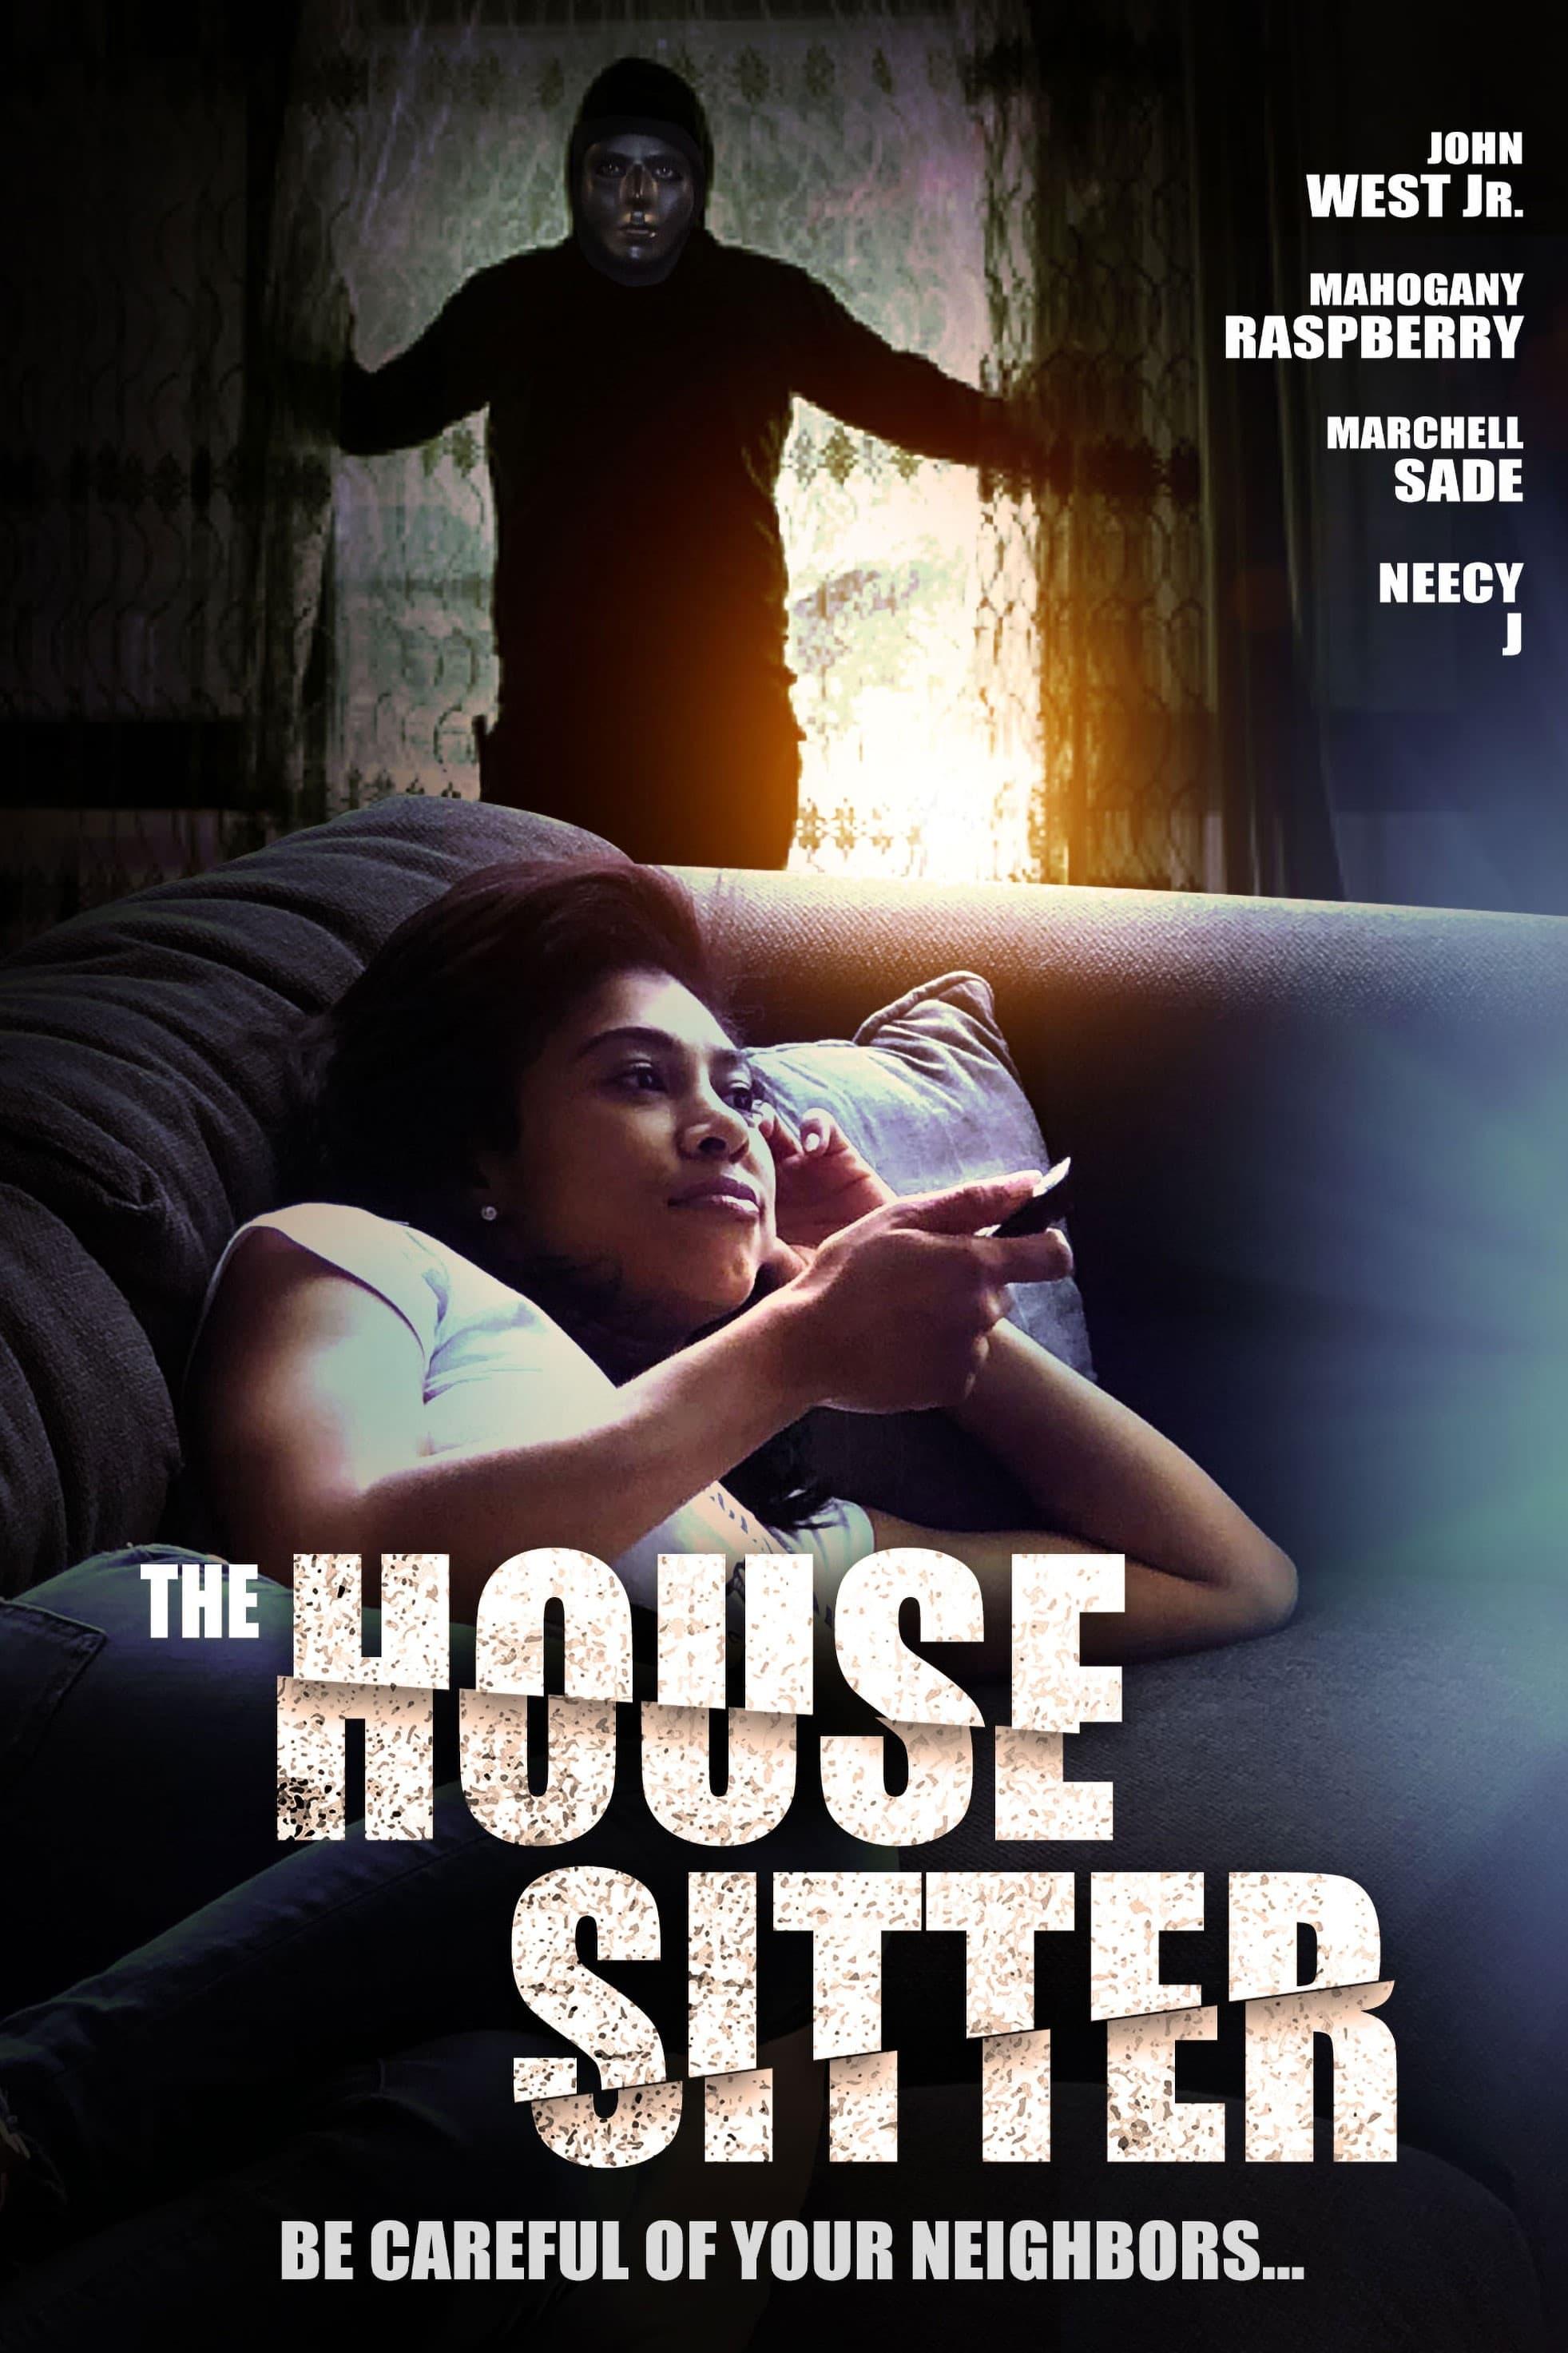 The House Sitter poster